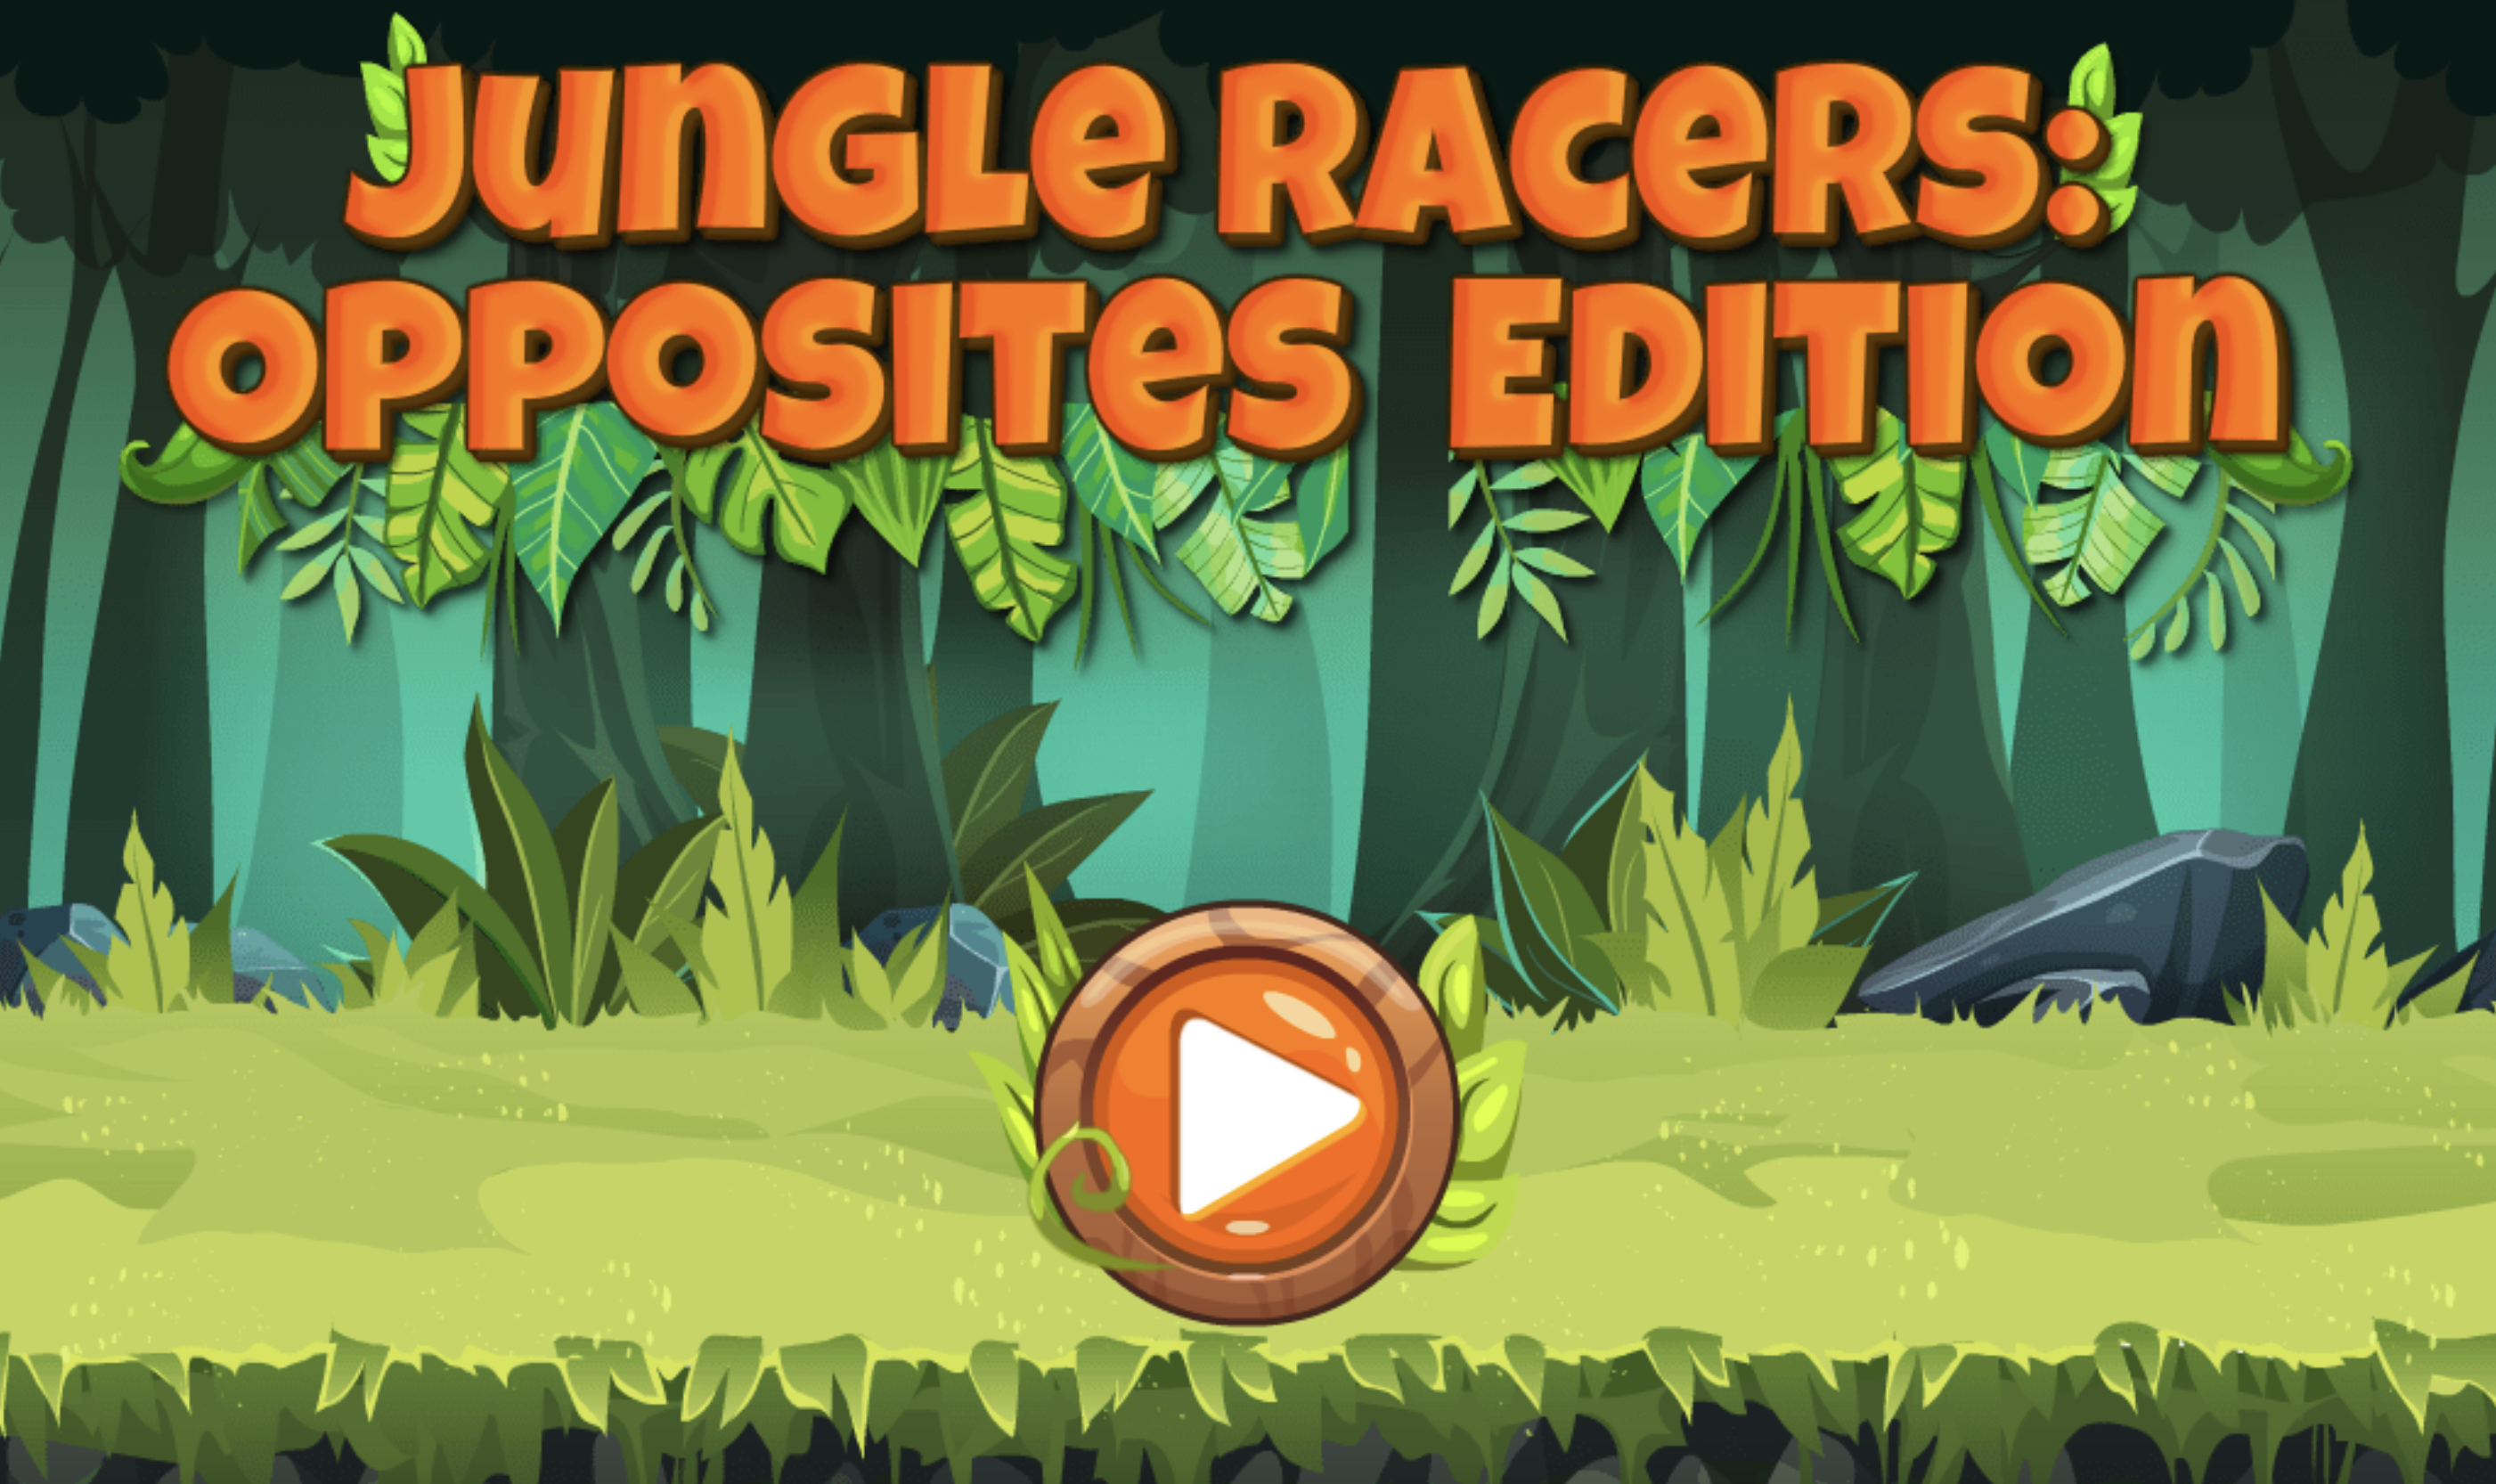 Jungle Racers: Opposites Edition